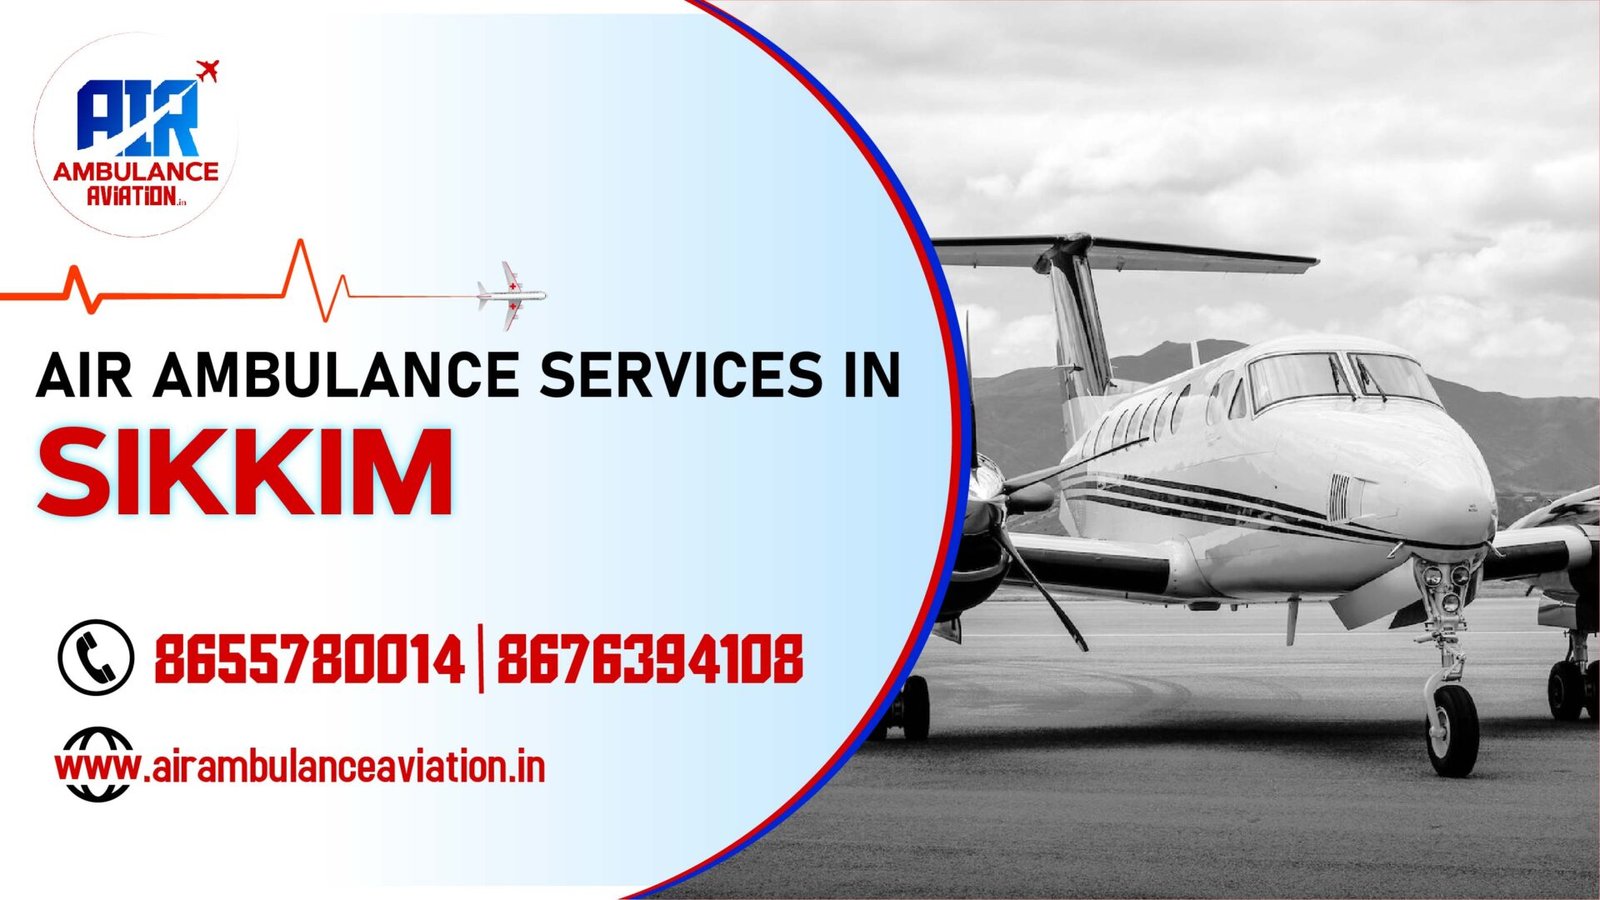 Air ambulance services in Sikkim